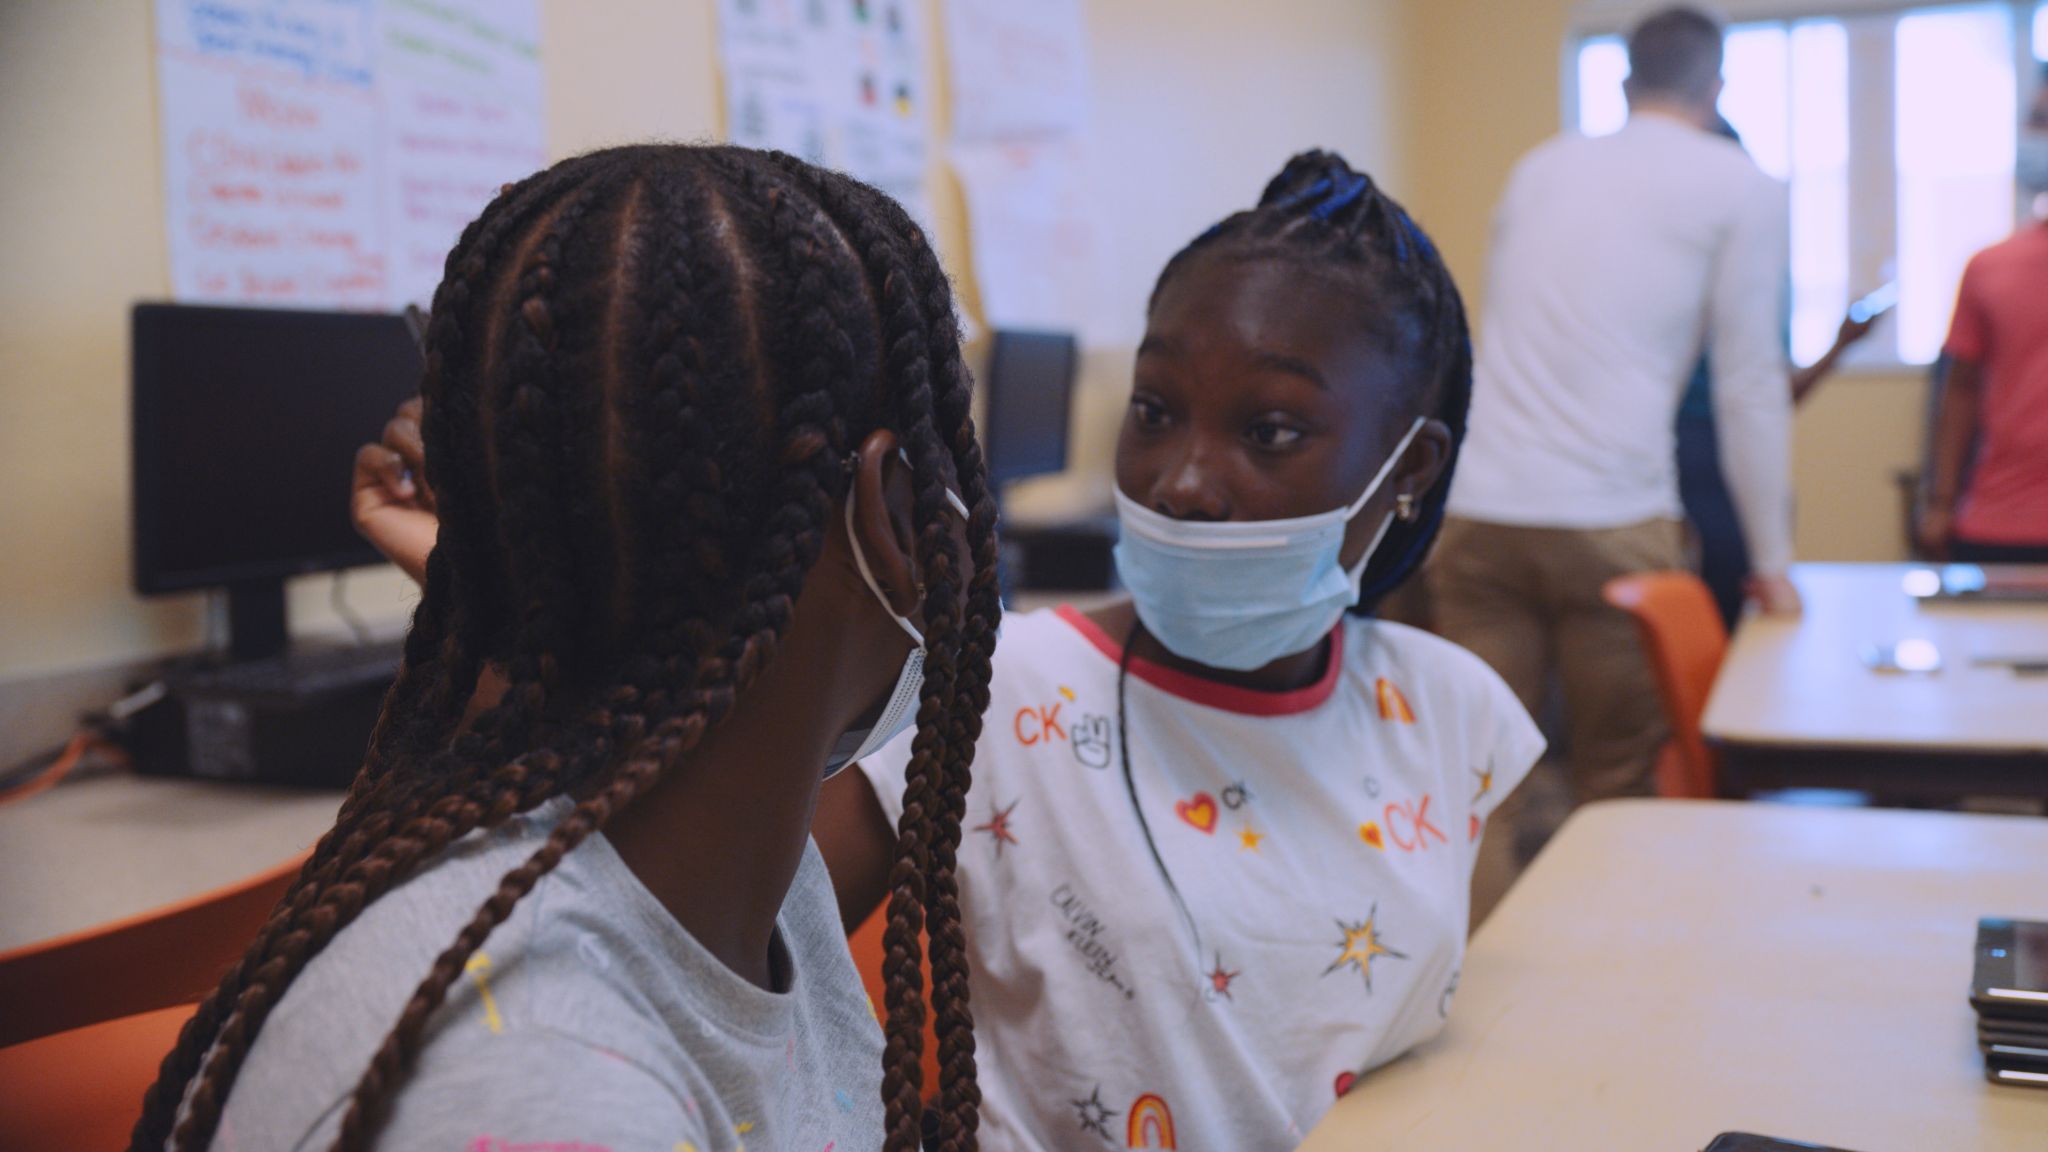 Two African American girls with braids and wearing surgeon masks facing each other in a classroom